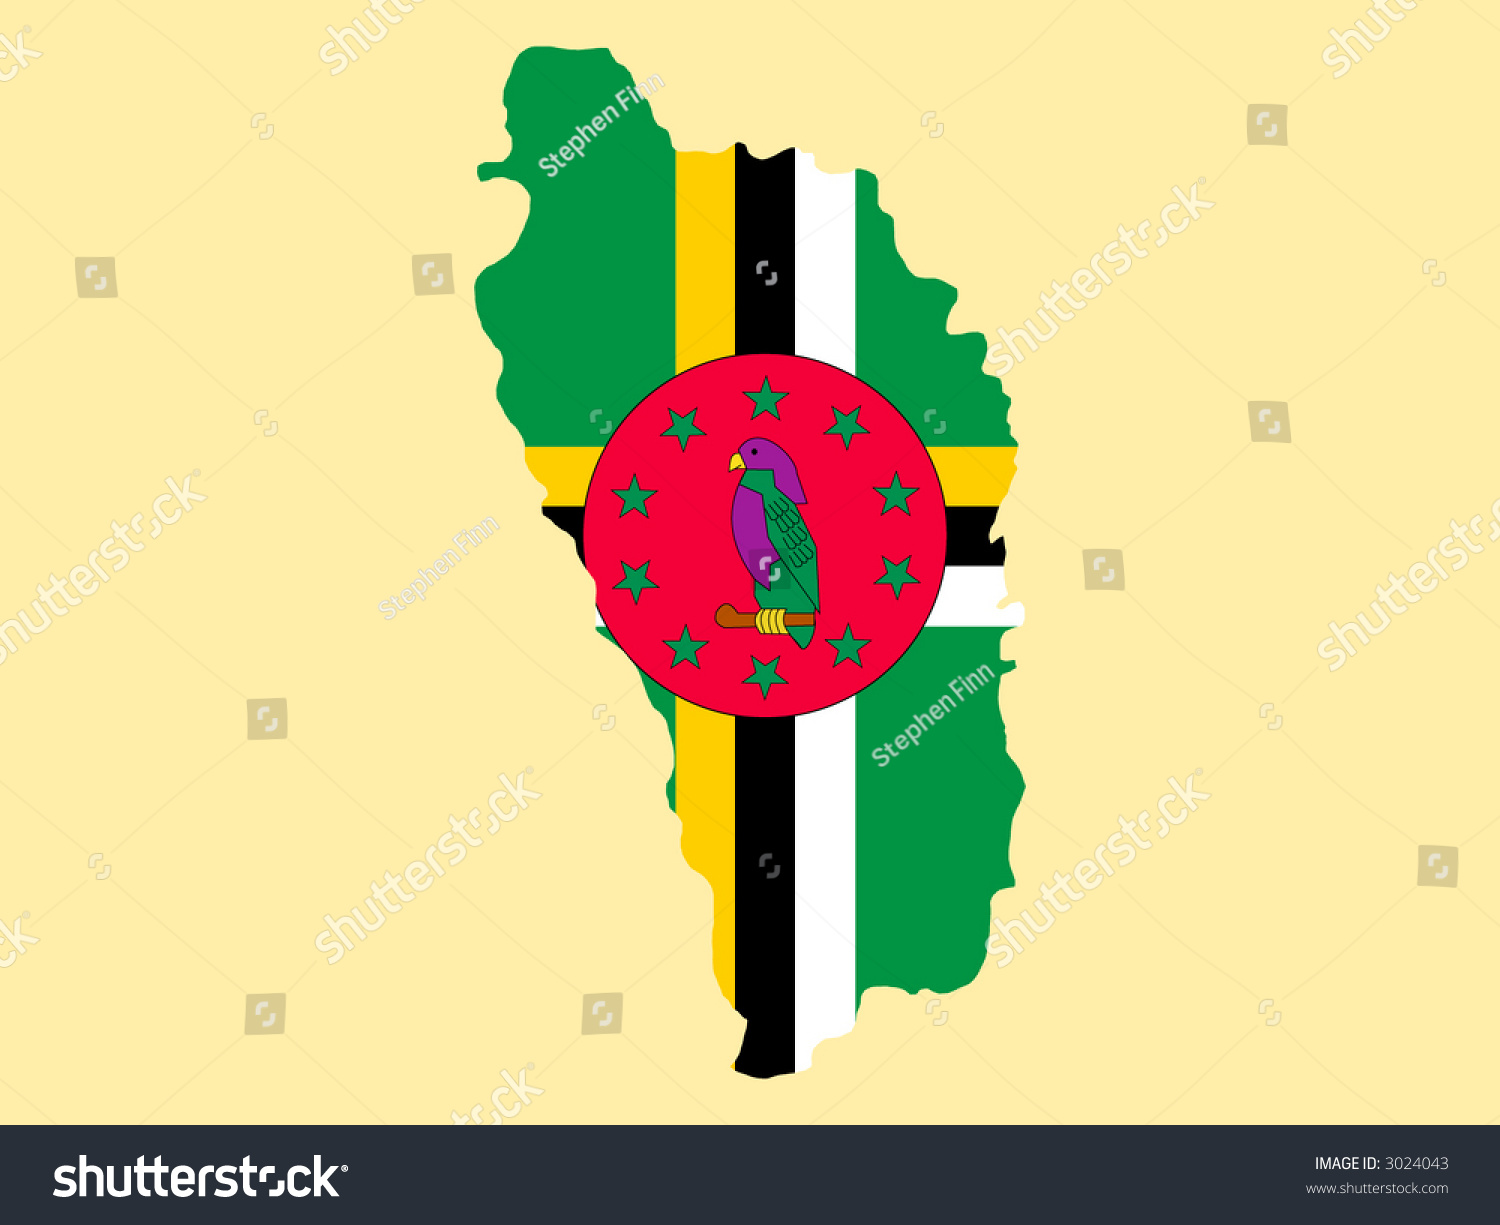 Map Of Dominica And Dominican Flag Illustration - 3024043 : Shutterstock